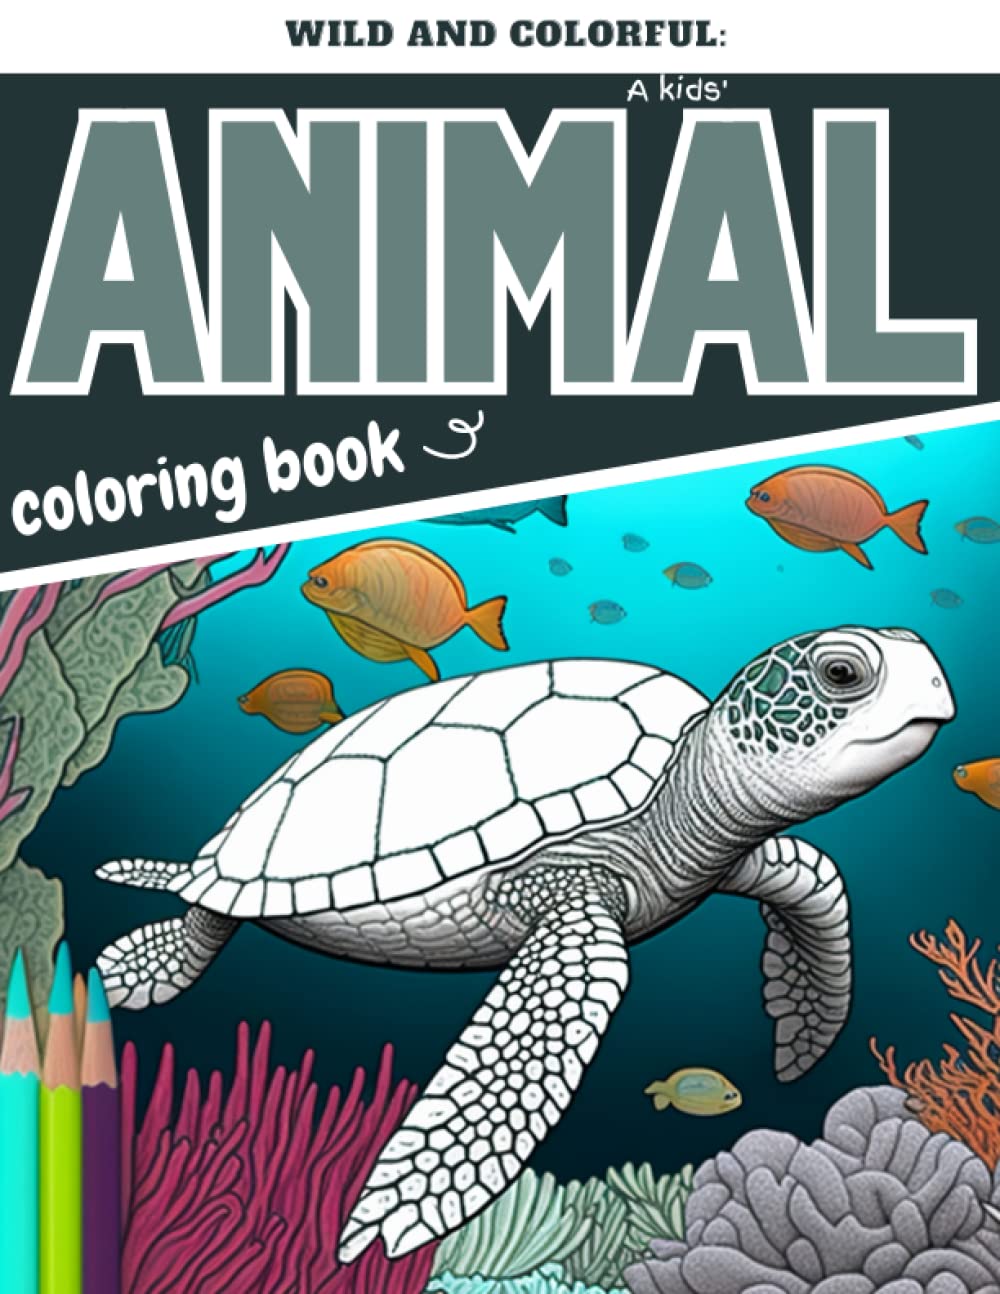 Wild and colorful: A kids' animal coloring book: The best advanced coloring book for young boys and girls that love animals! (Coloring books for kids!!)